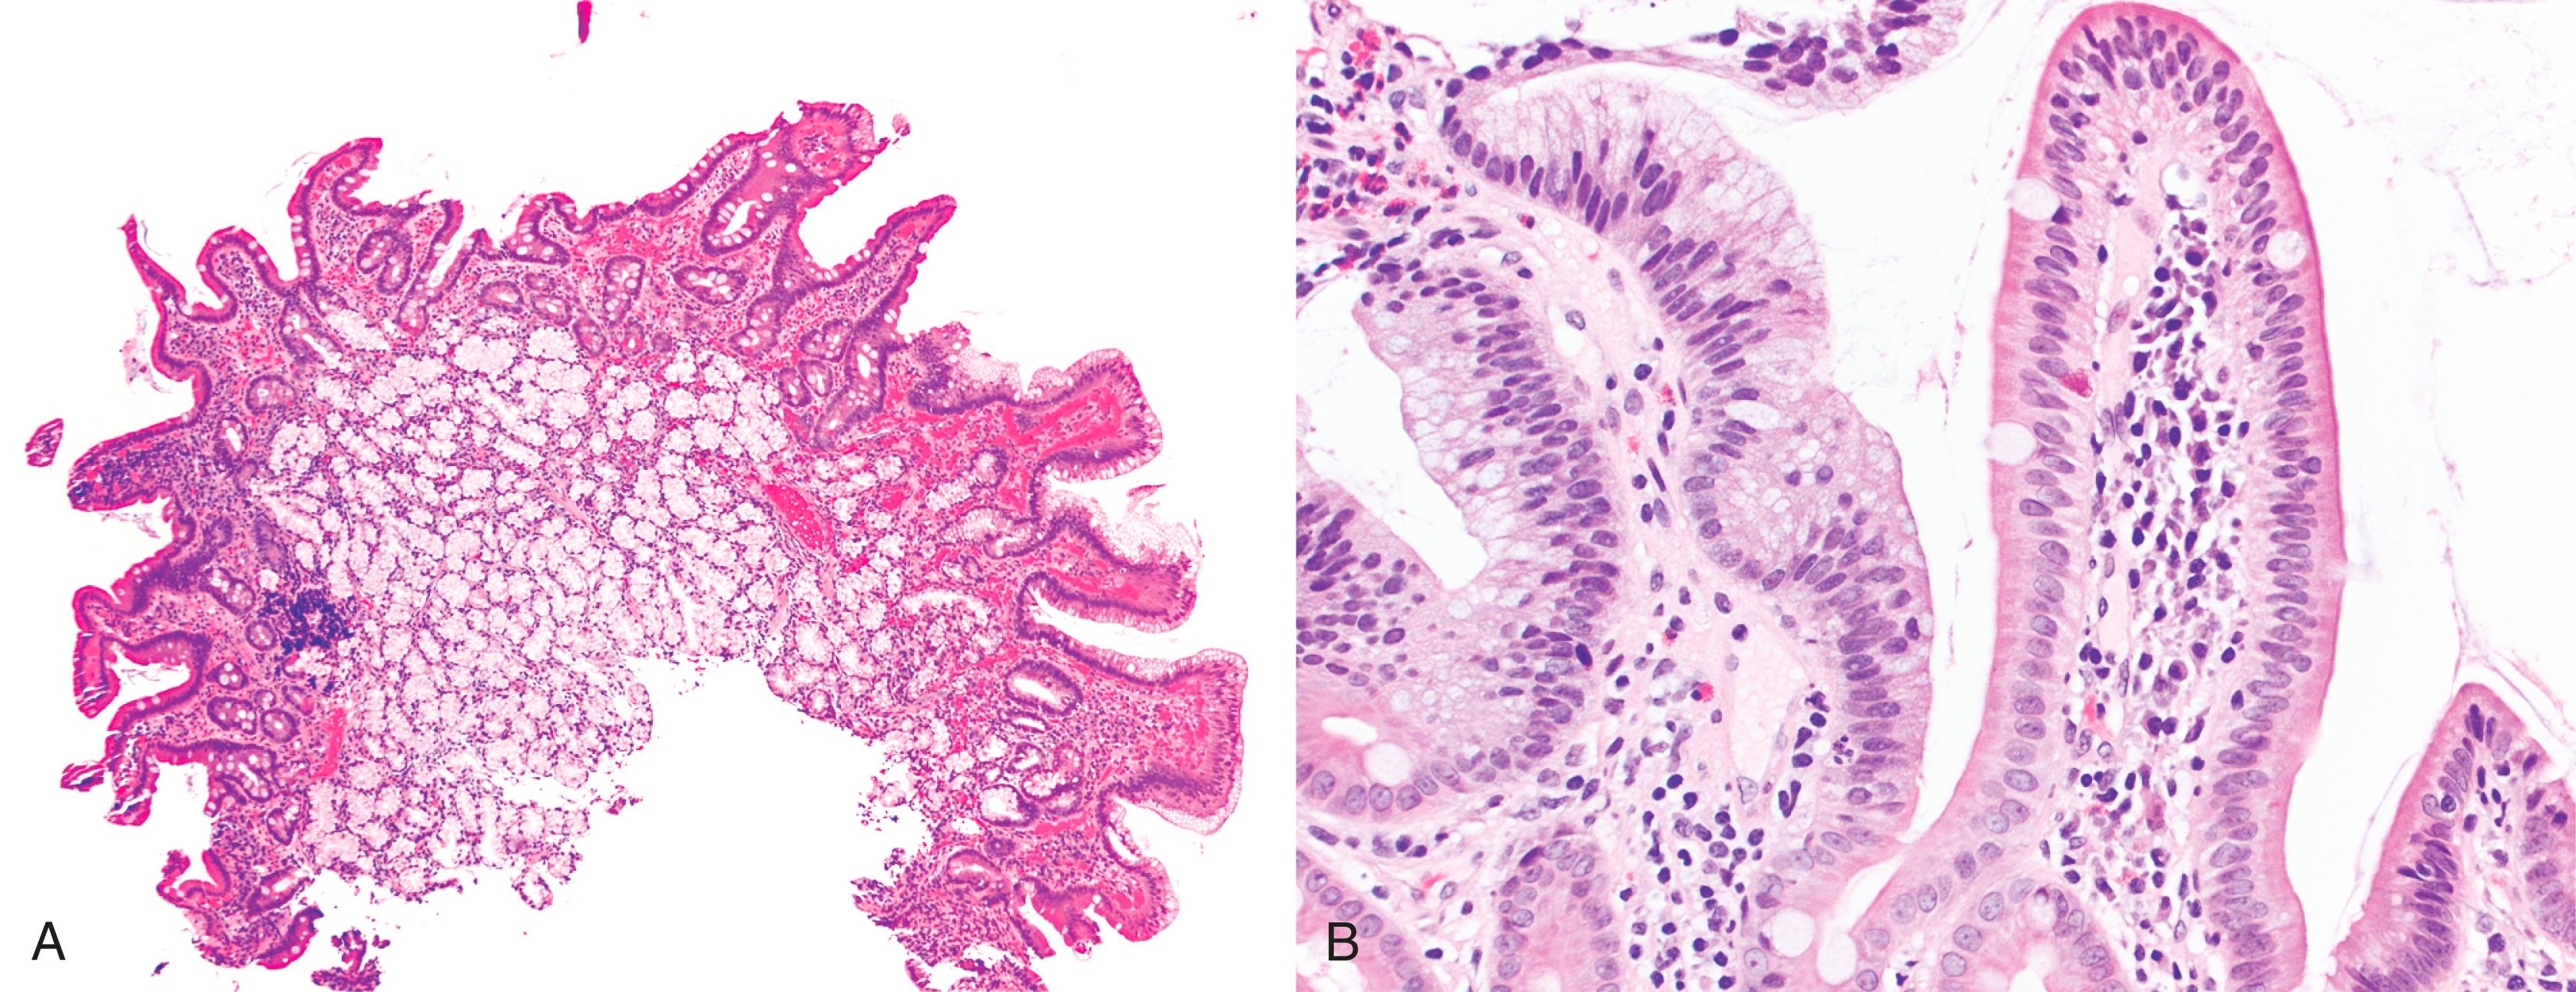 FIGURE 21.7, Nodular peptic-type duodenitis. A, Hyperplastic Brunner glands fill the lamina propria, imparting a nodular appearance to the mucosa. Partial villous shortening and increased lamina propria chronic inflammation are also seen, indicative of duodenitis. B, Foveolar-type metaplasia is present on the villous surface of the duodenum. In contrast with the absorptive and goblet cells, the metaplastic cells contain small apical vacuoles, similar to gastric foveolar cells.